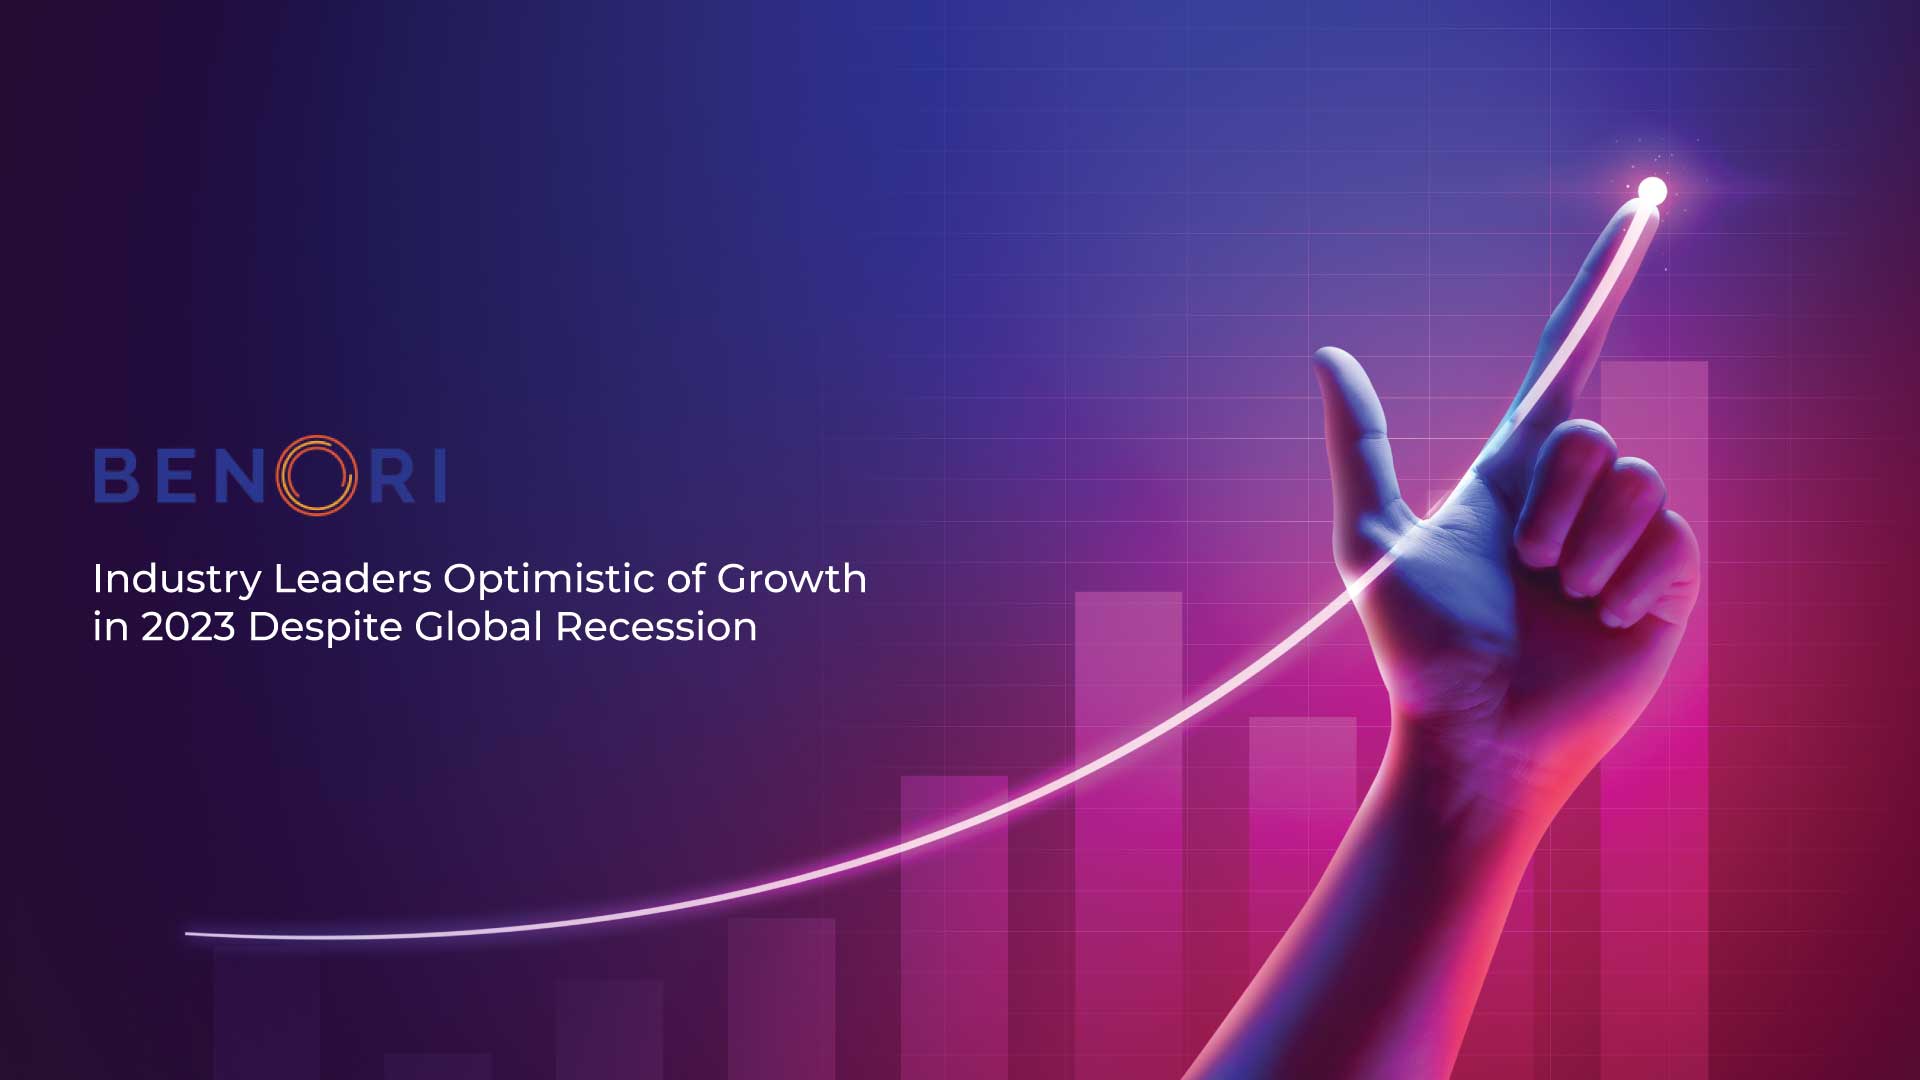 84% of Indian business leaders are optimistic about growth in 2023 despite the global recession - A survey with business leaders by Benori Knowledge